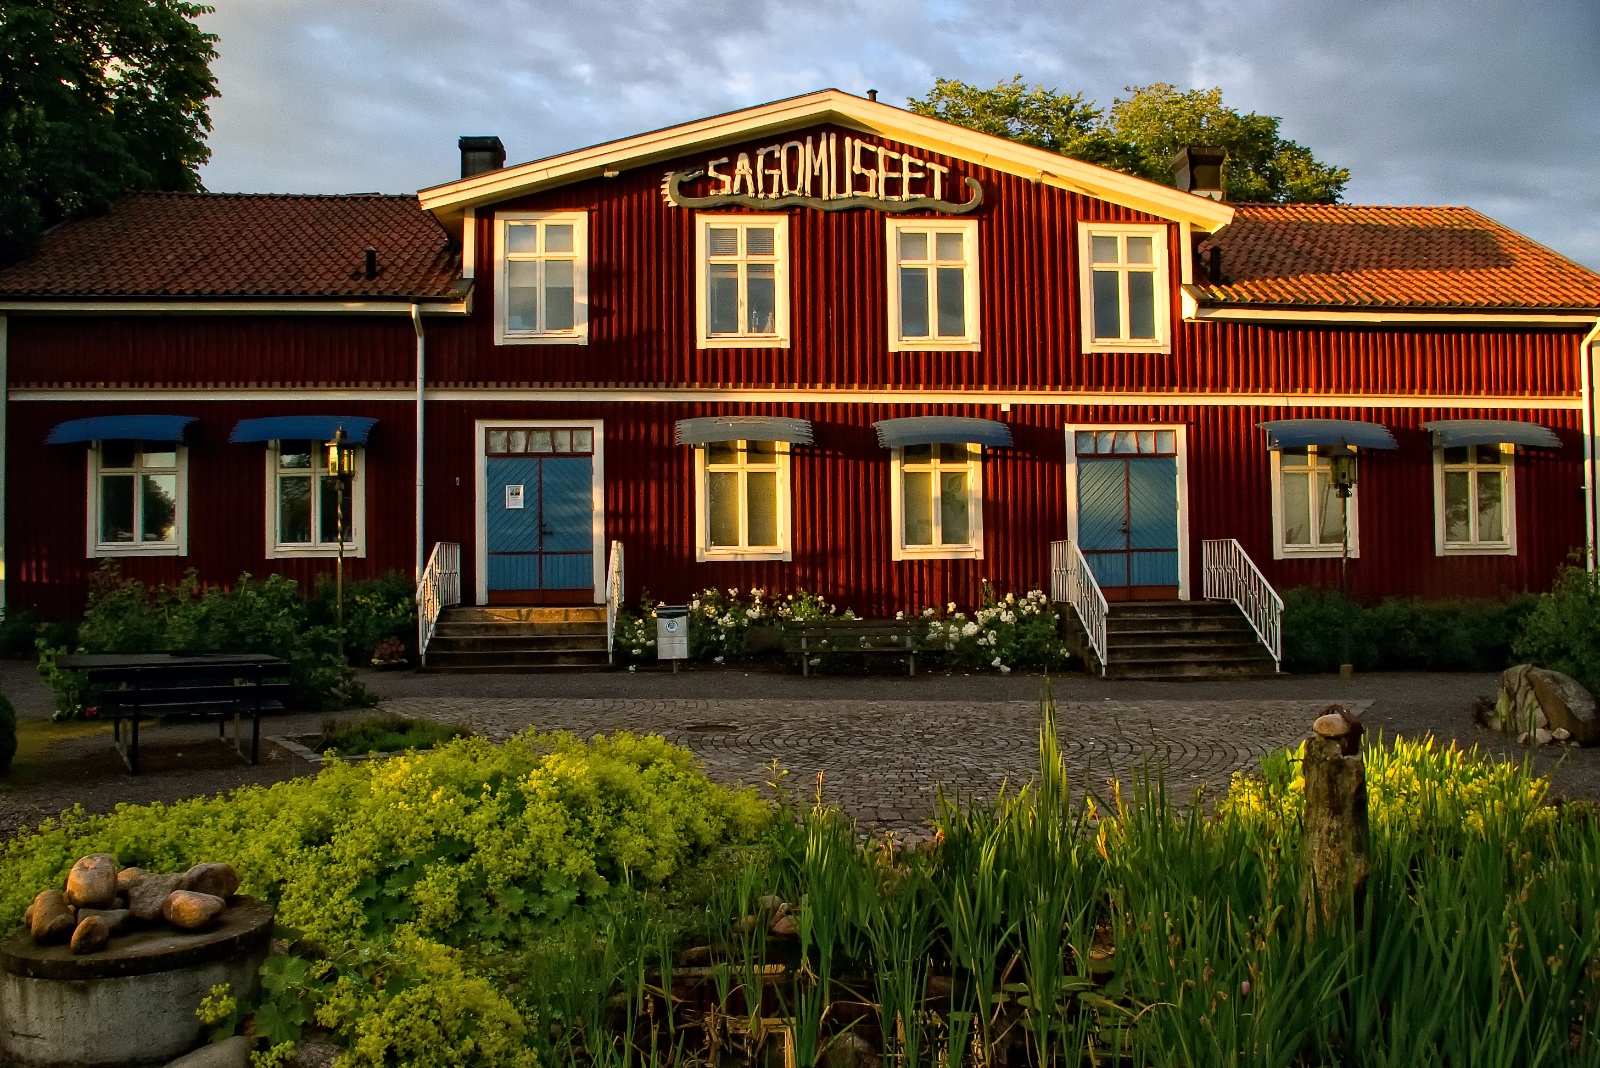 Sagomuseet Ljungby: in the heart of the Land of Legends